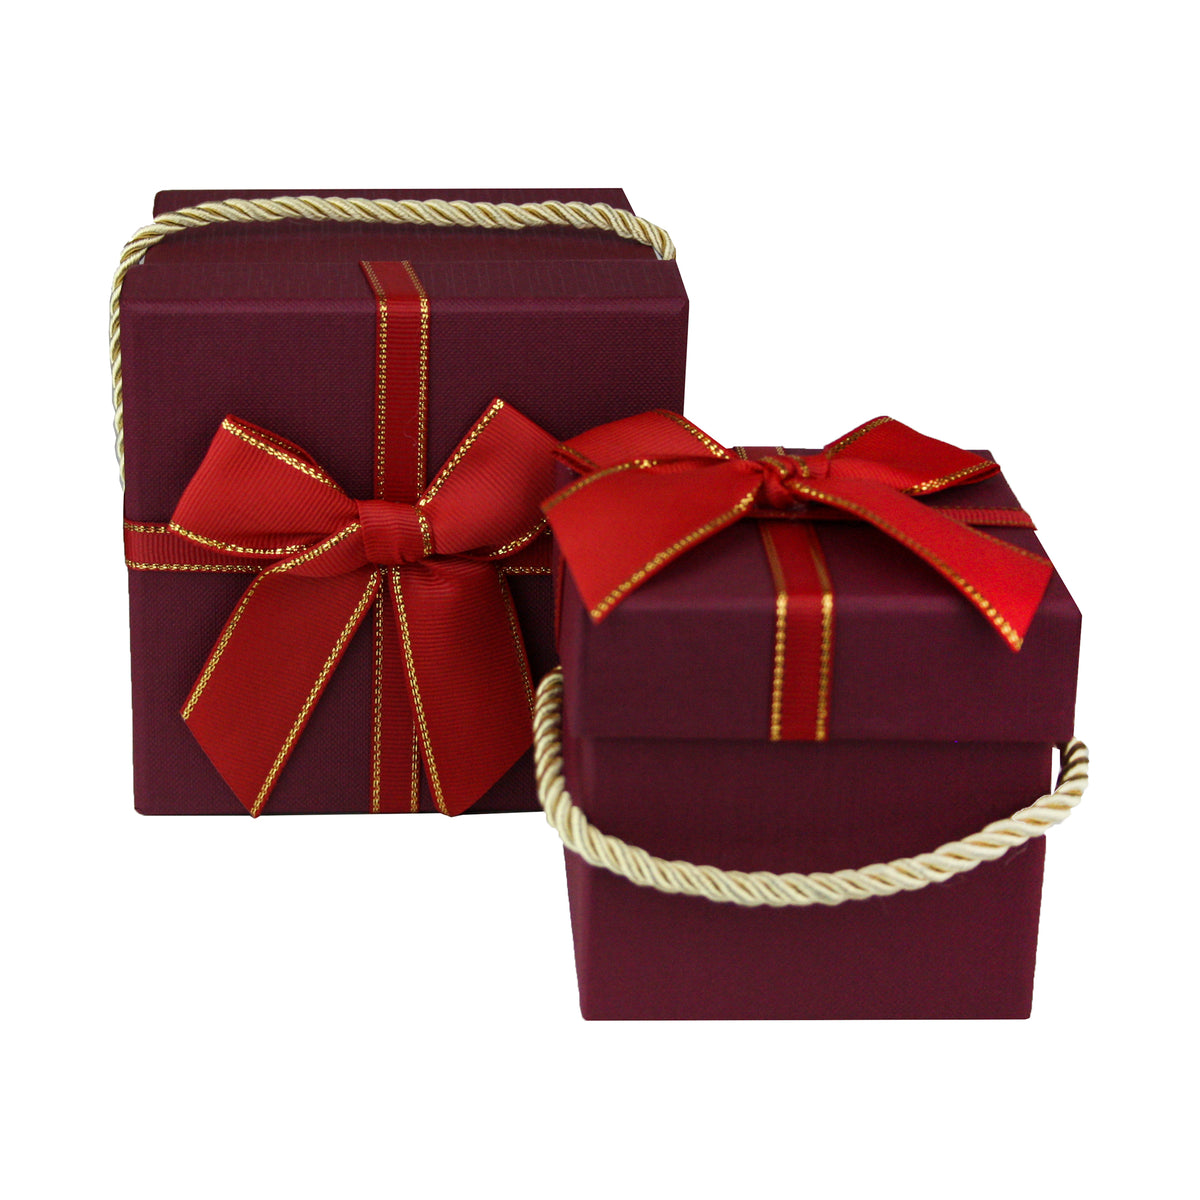 Set of 2 Red Gift Boxes